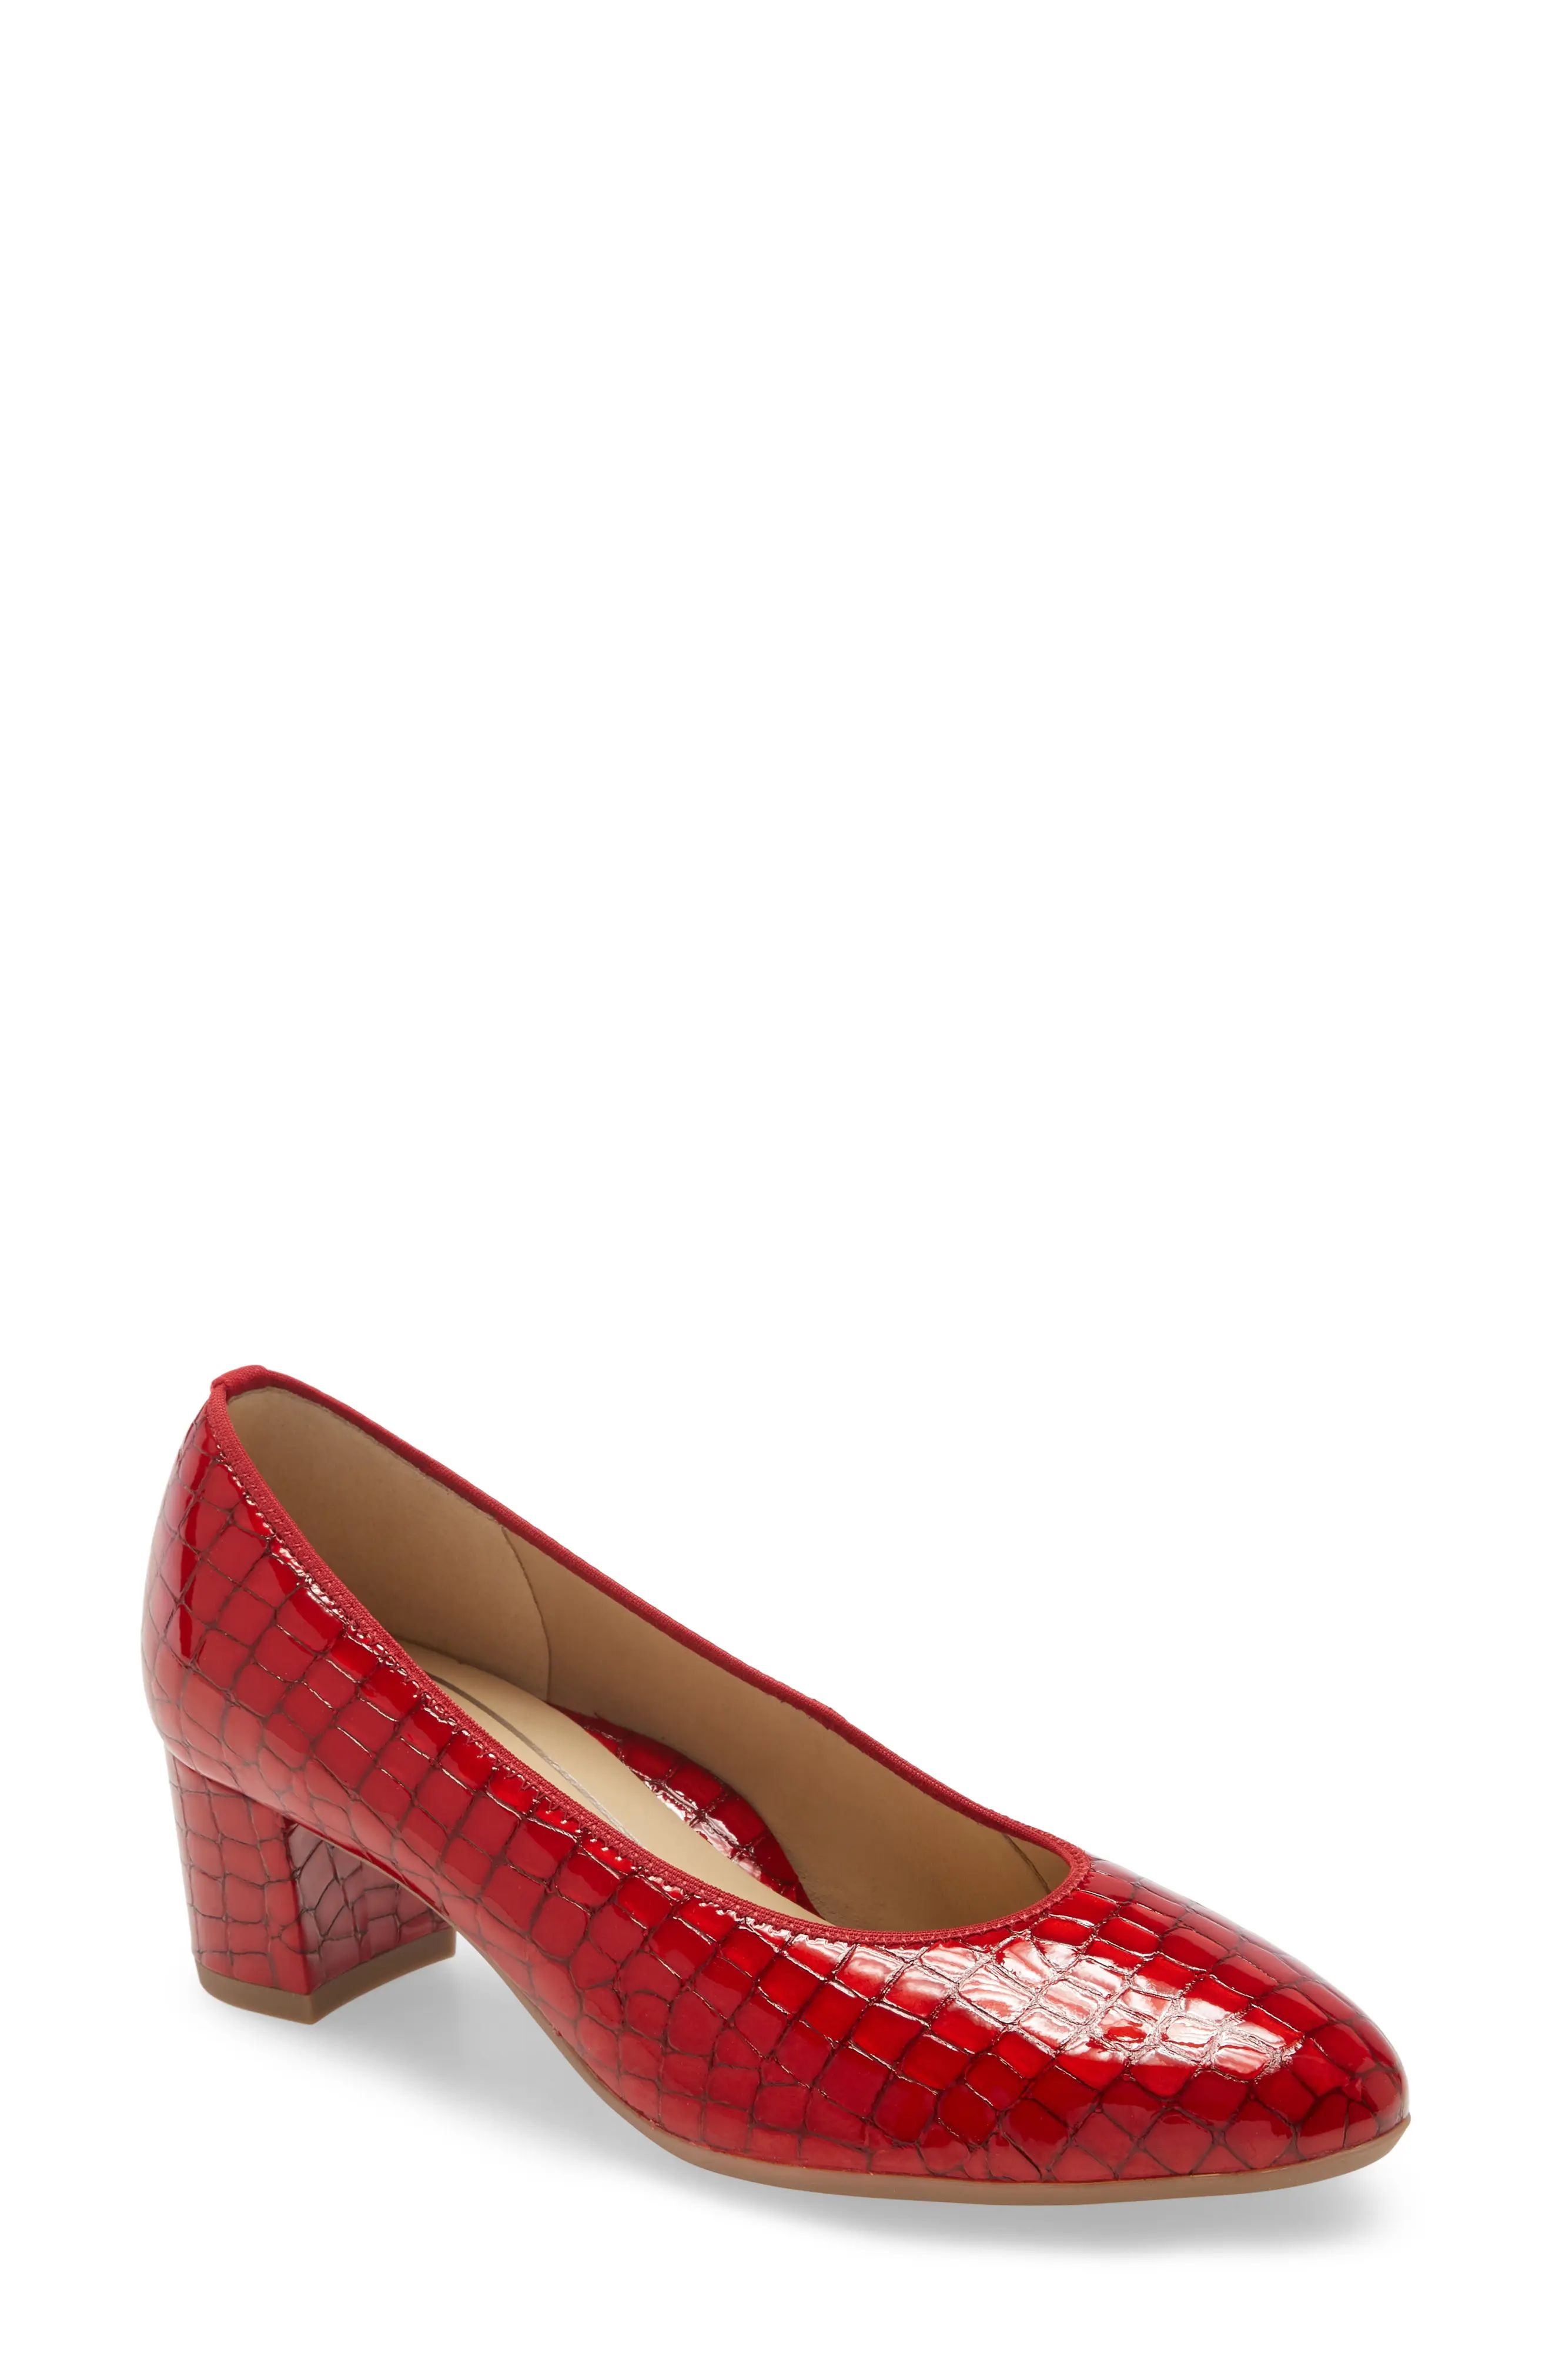 ara Kendall Pump in Red Patent Leather at Nordstrom, Size 6 | Nordstrom